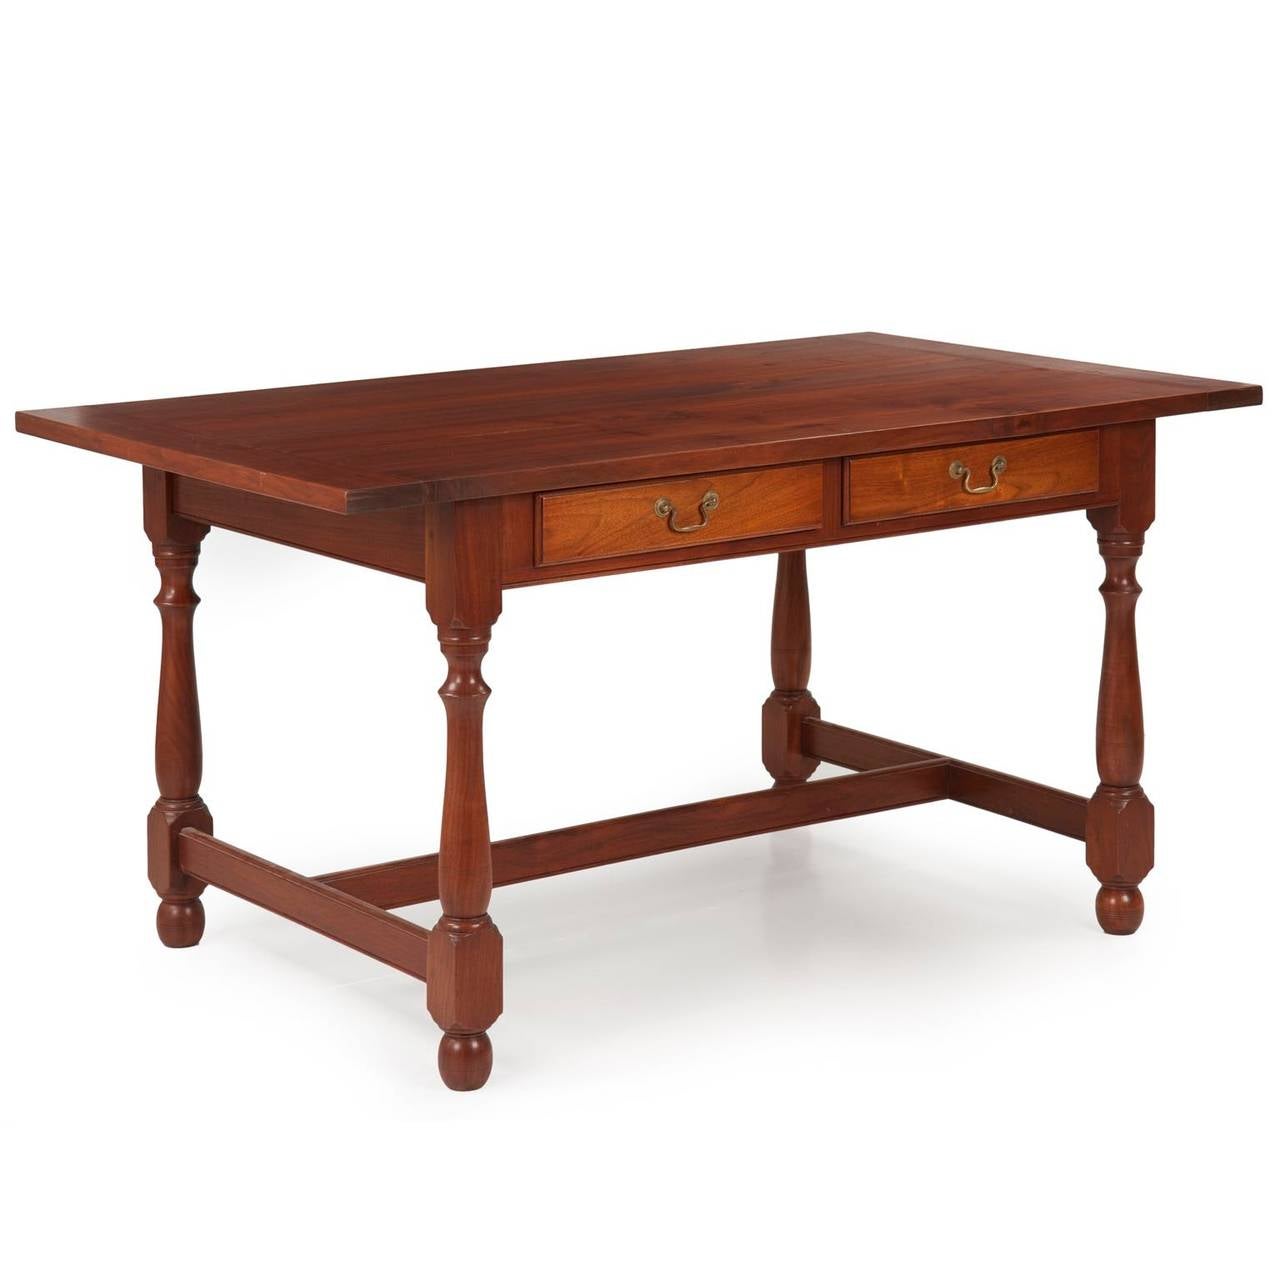 Crafted using inordinately thick and heavy solid walnut planks, this fine benchmade dining table is a fine representation of the strong and stoic William and Mary style of Pennsylvania during the first half of the 18th Century.  It is a piece built